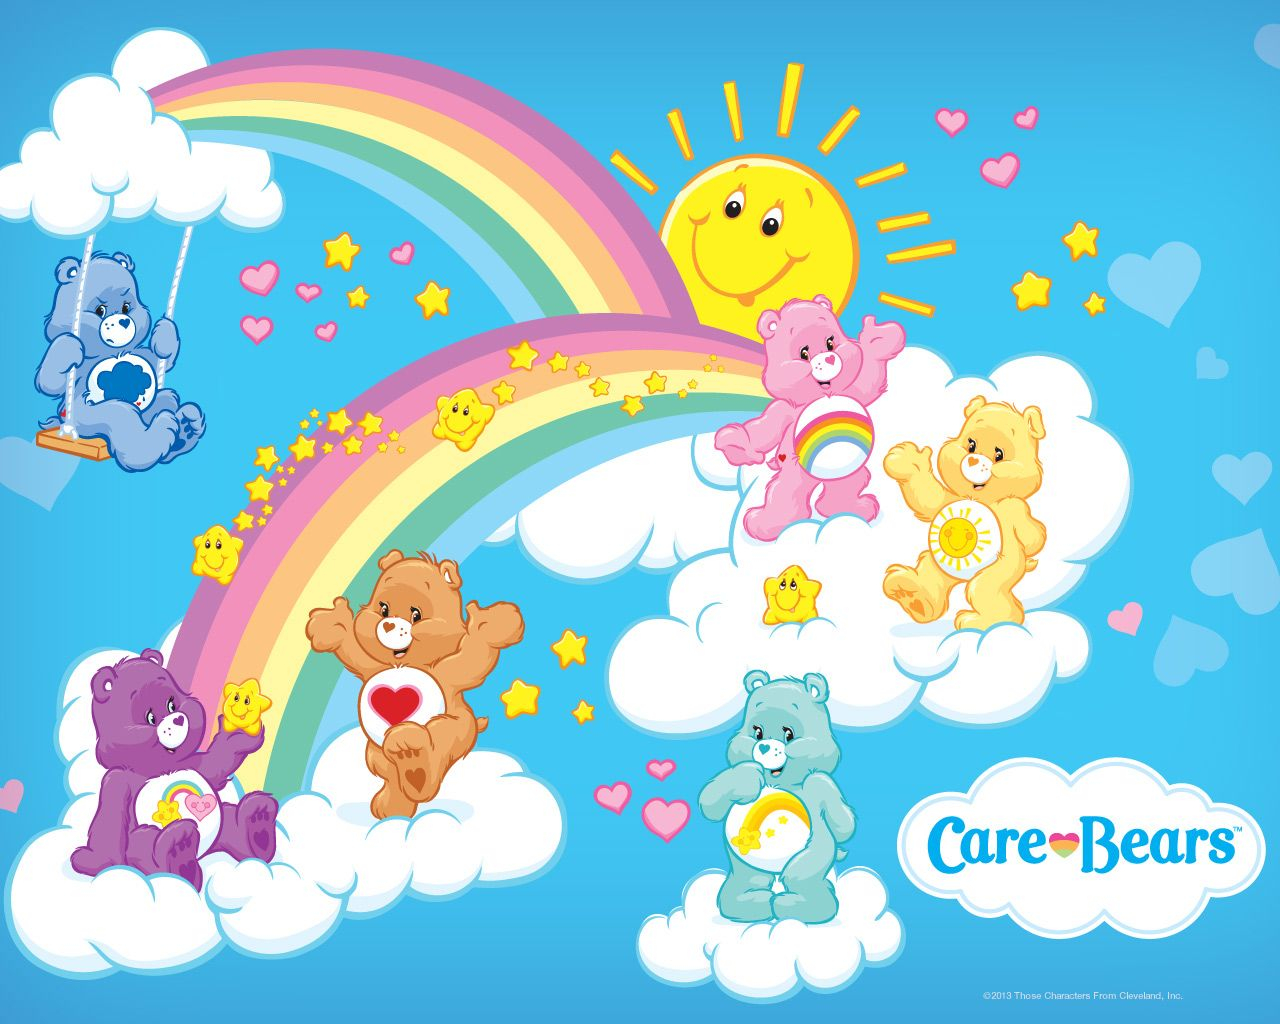 Care Bear Wallpaper Images And Wallpapers All Free To Download pertaining to sizing 1280 X 1024